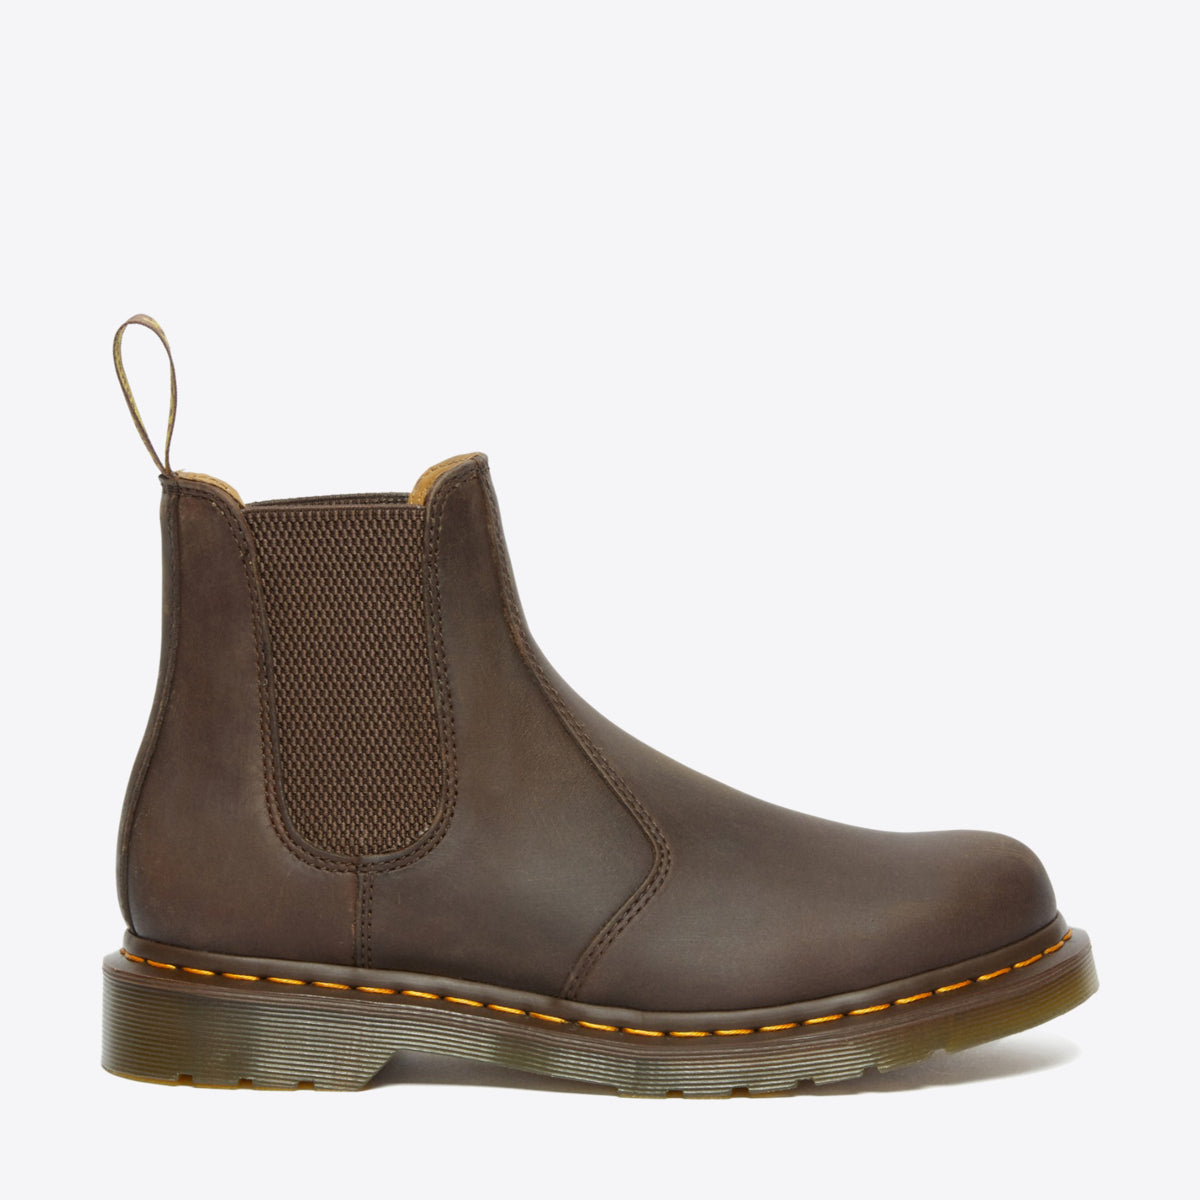 DR MARTENS 2976 Yellow Stitch Crazy Horse Chelsea Boot Dark Brown - Image 1